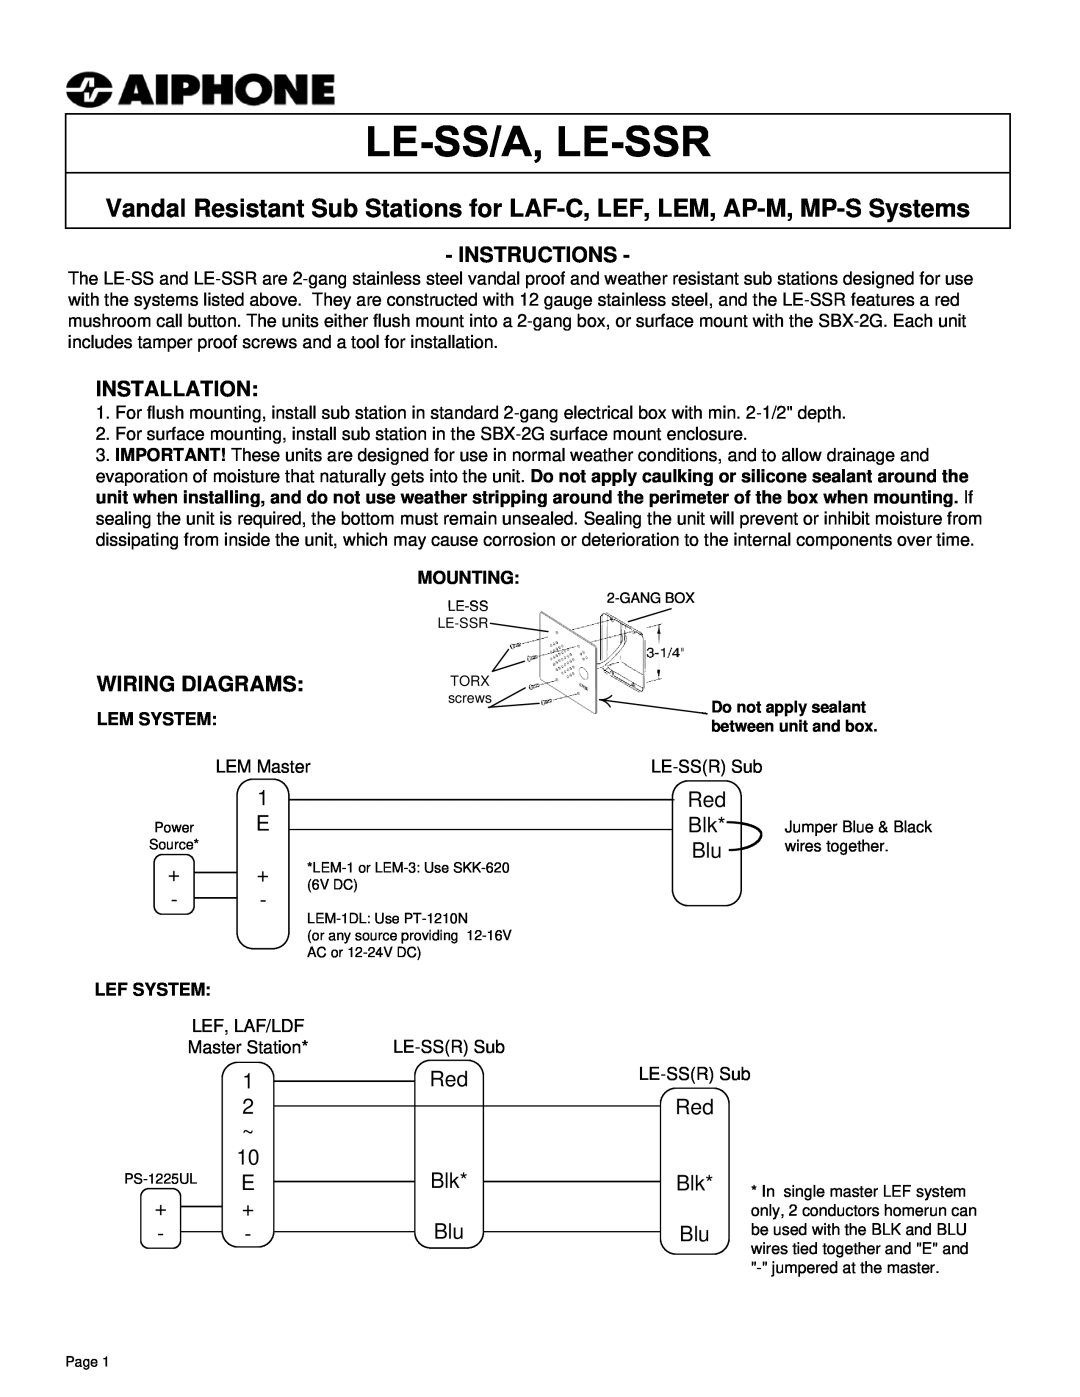 Aiphone LE-SS/LE-SSR/LE-SS-GP manual Instructions, Installation, Wiring Diagrams 